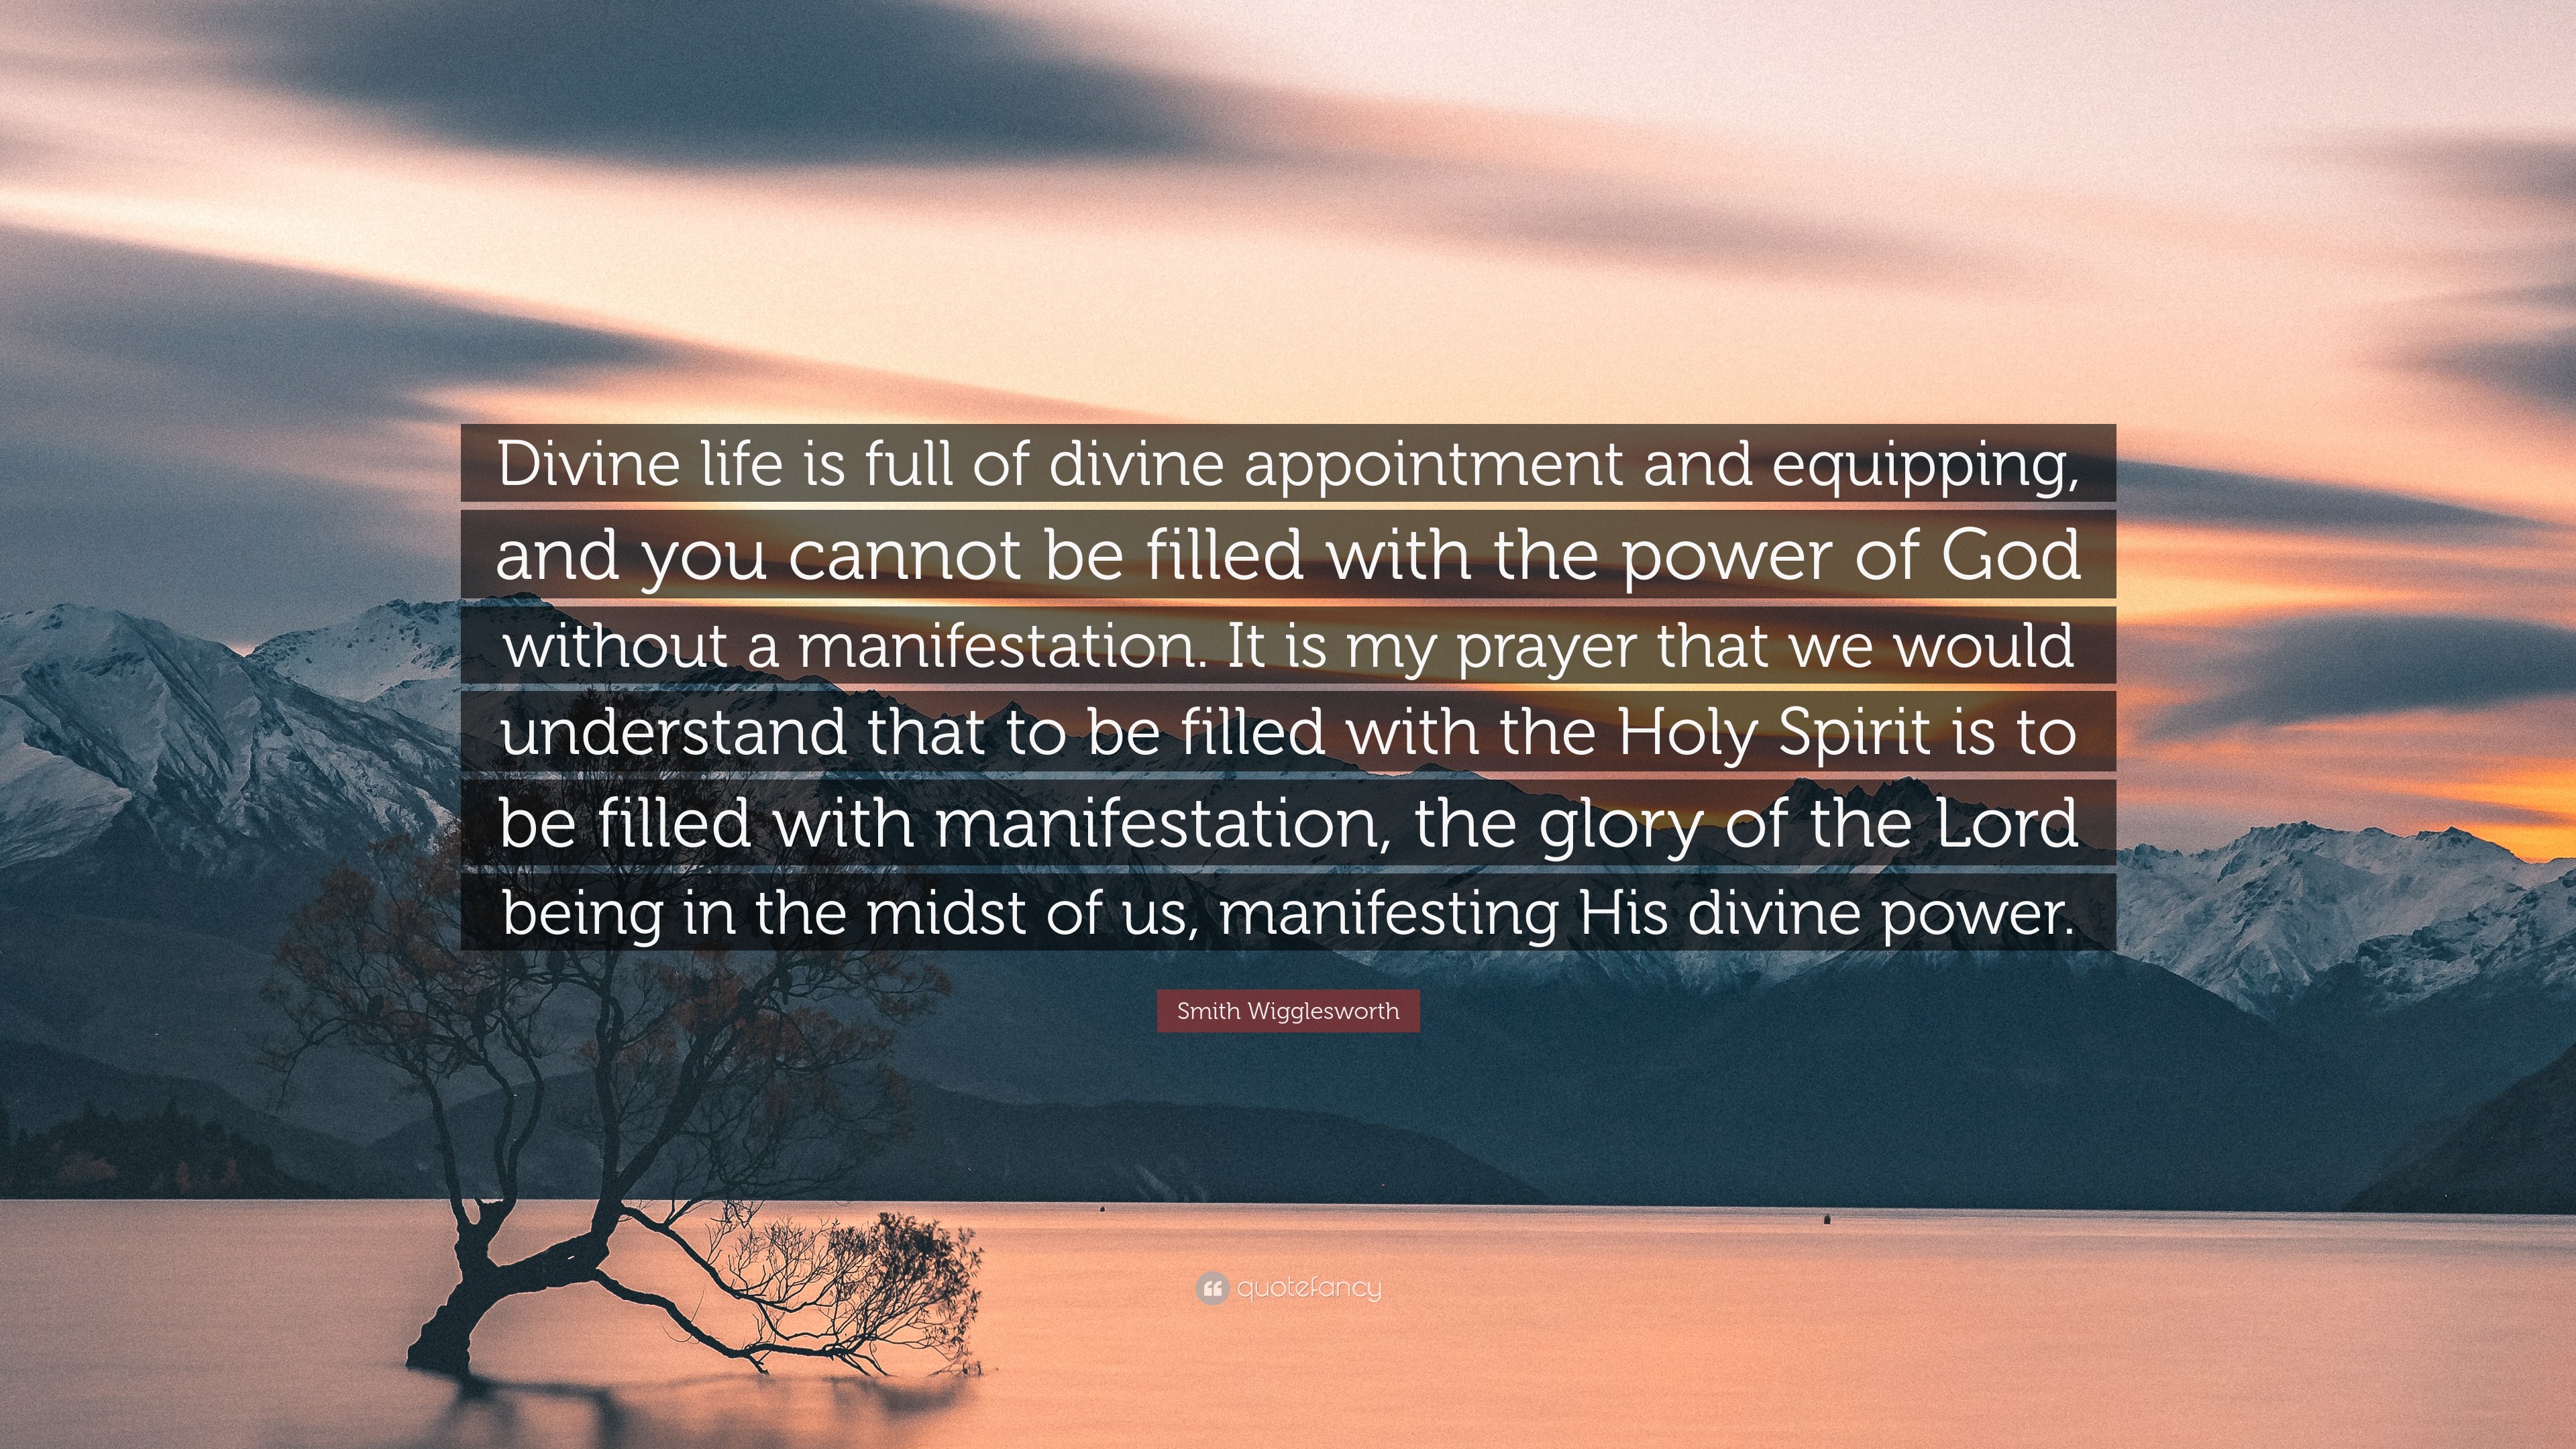 Smith Wigglesworth Quote: “Divine life is full of divine appointment and  equipping, and you cannot be filled with the power of God without a  manife”